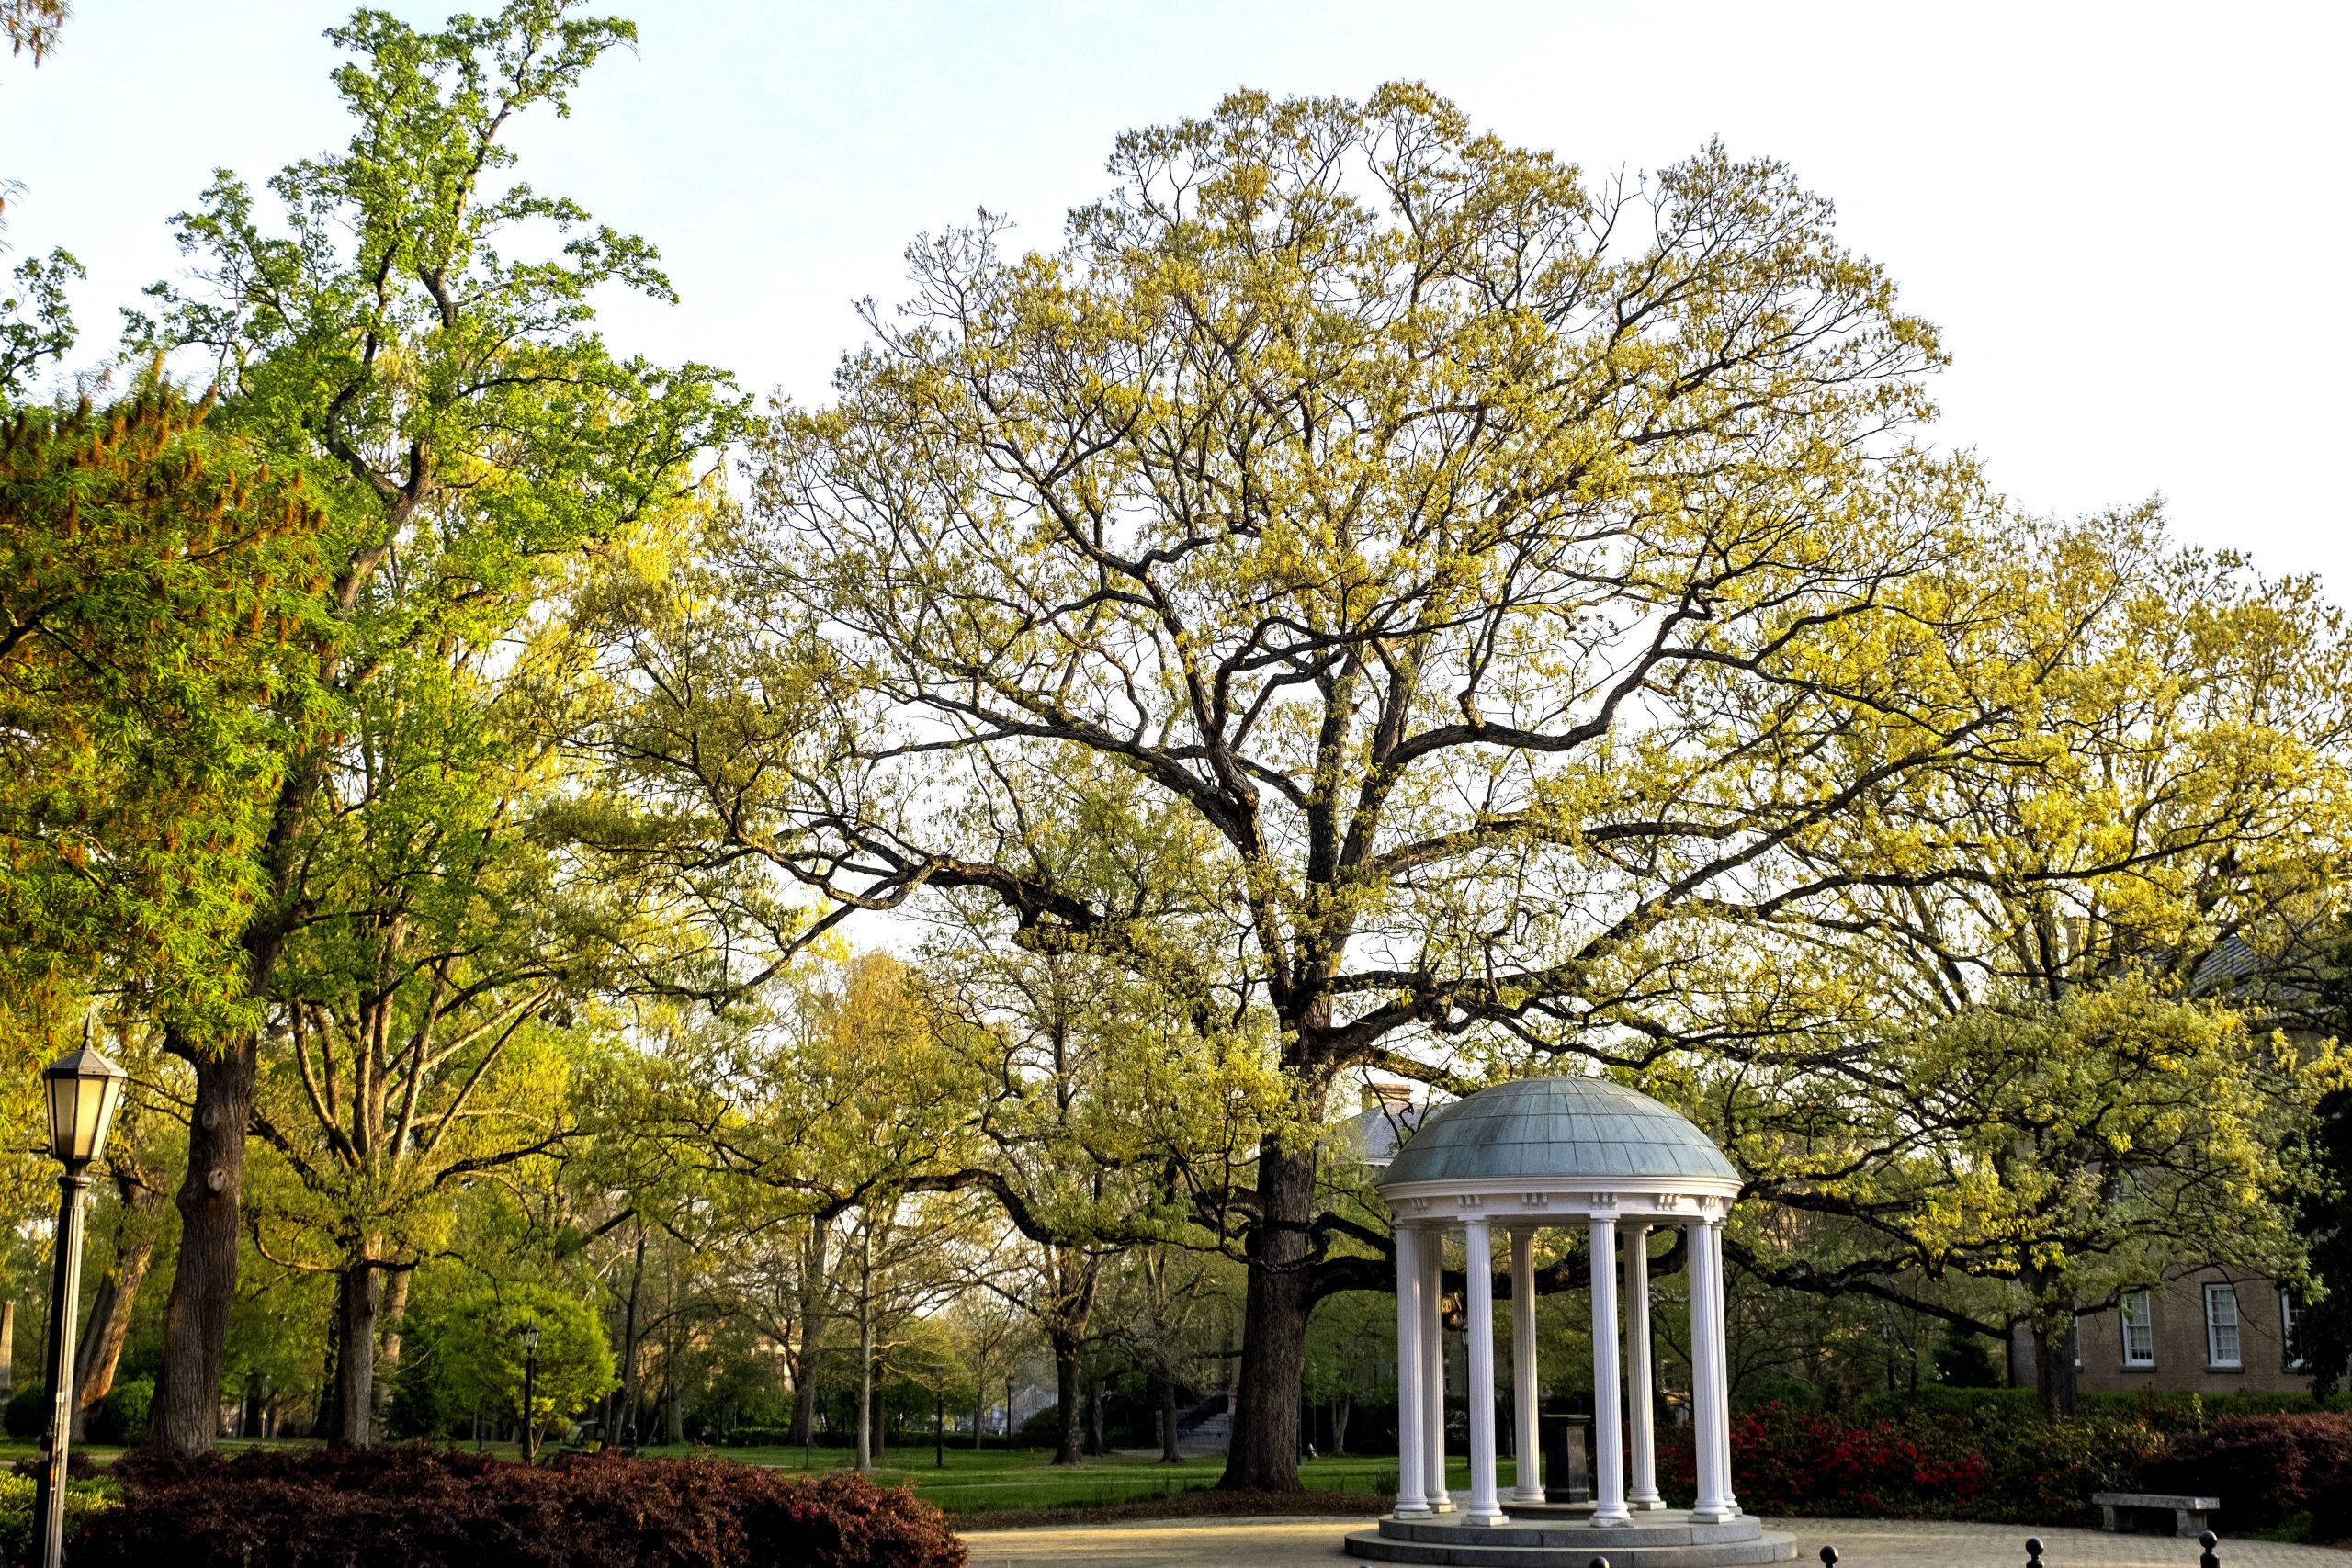 unc-chapel-hill-ranks-29th-in-2021-academic-ranking-of-world-universities-unc-global